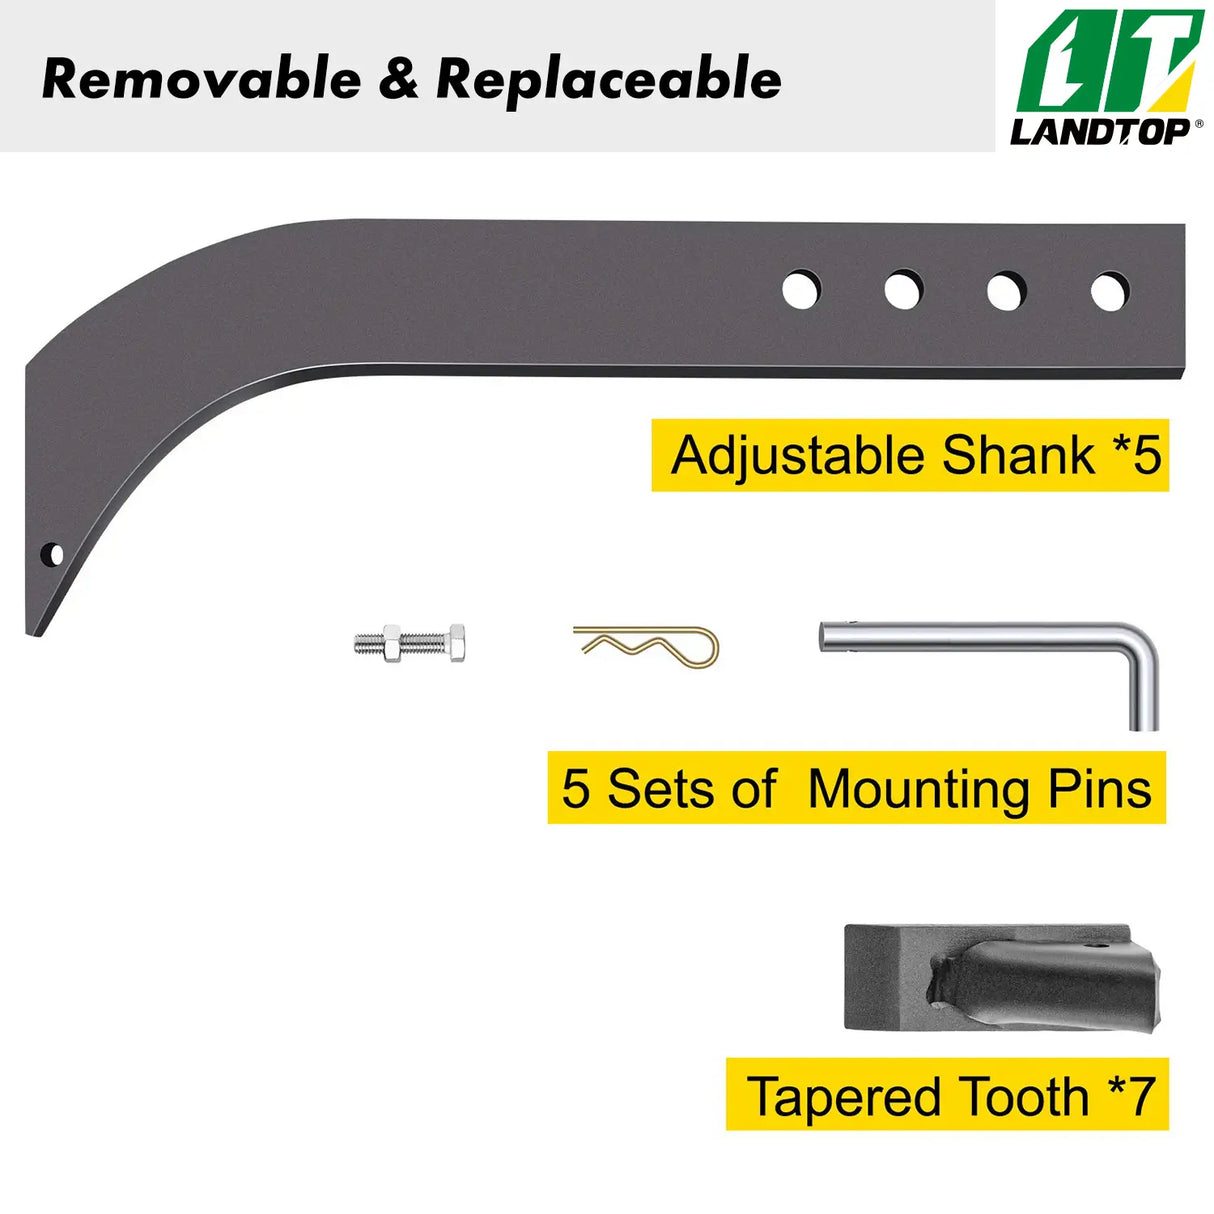 5pcs Box Blade Shank, 18" Scarifier Shank, 4 Holes Box Scraper Shank, Ripper Shank with Removable Tapered Teeth and Pins, Adjustable Shanks Assembly for Replacement, Digging, Plowing